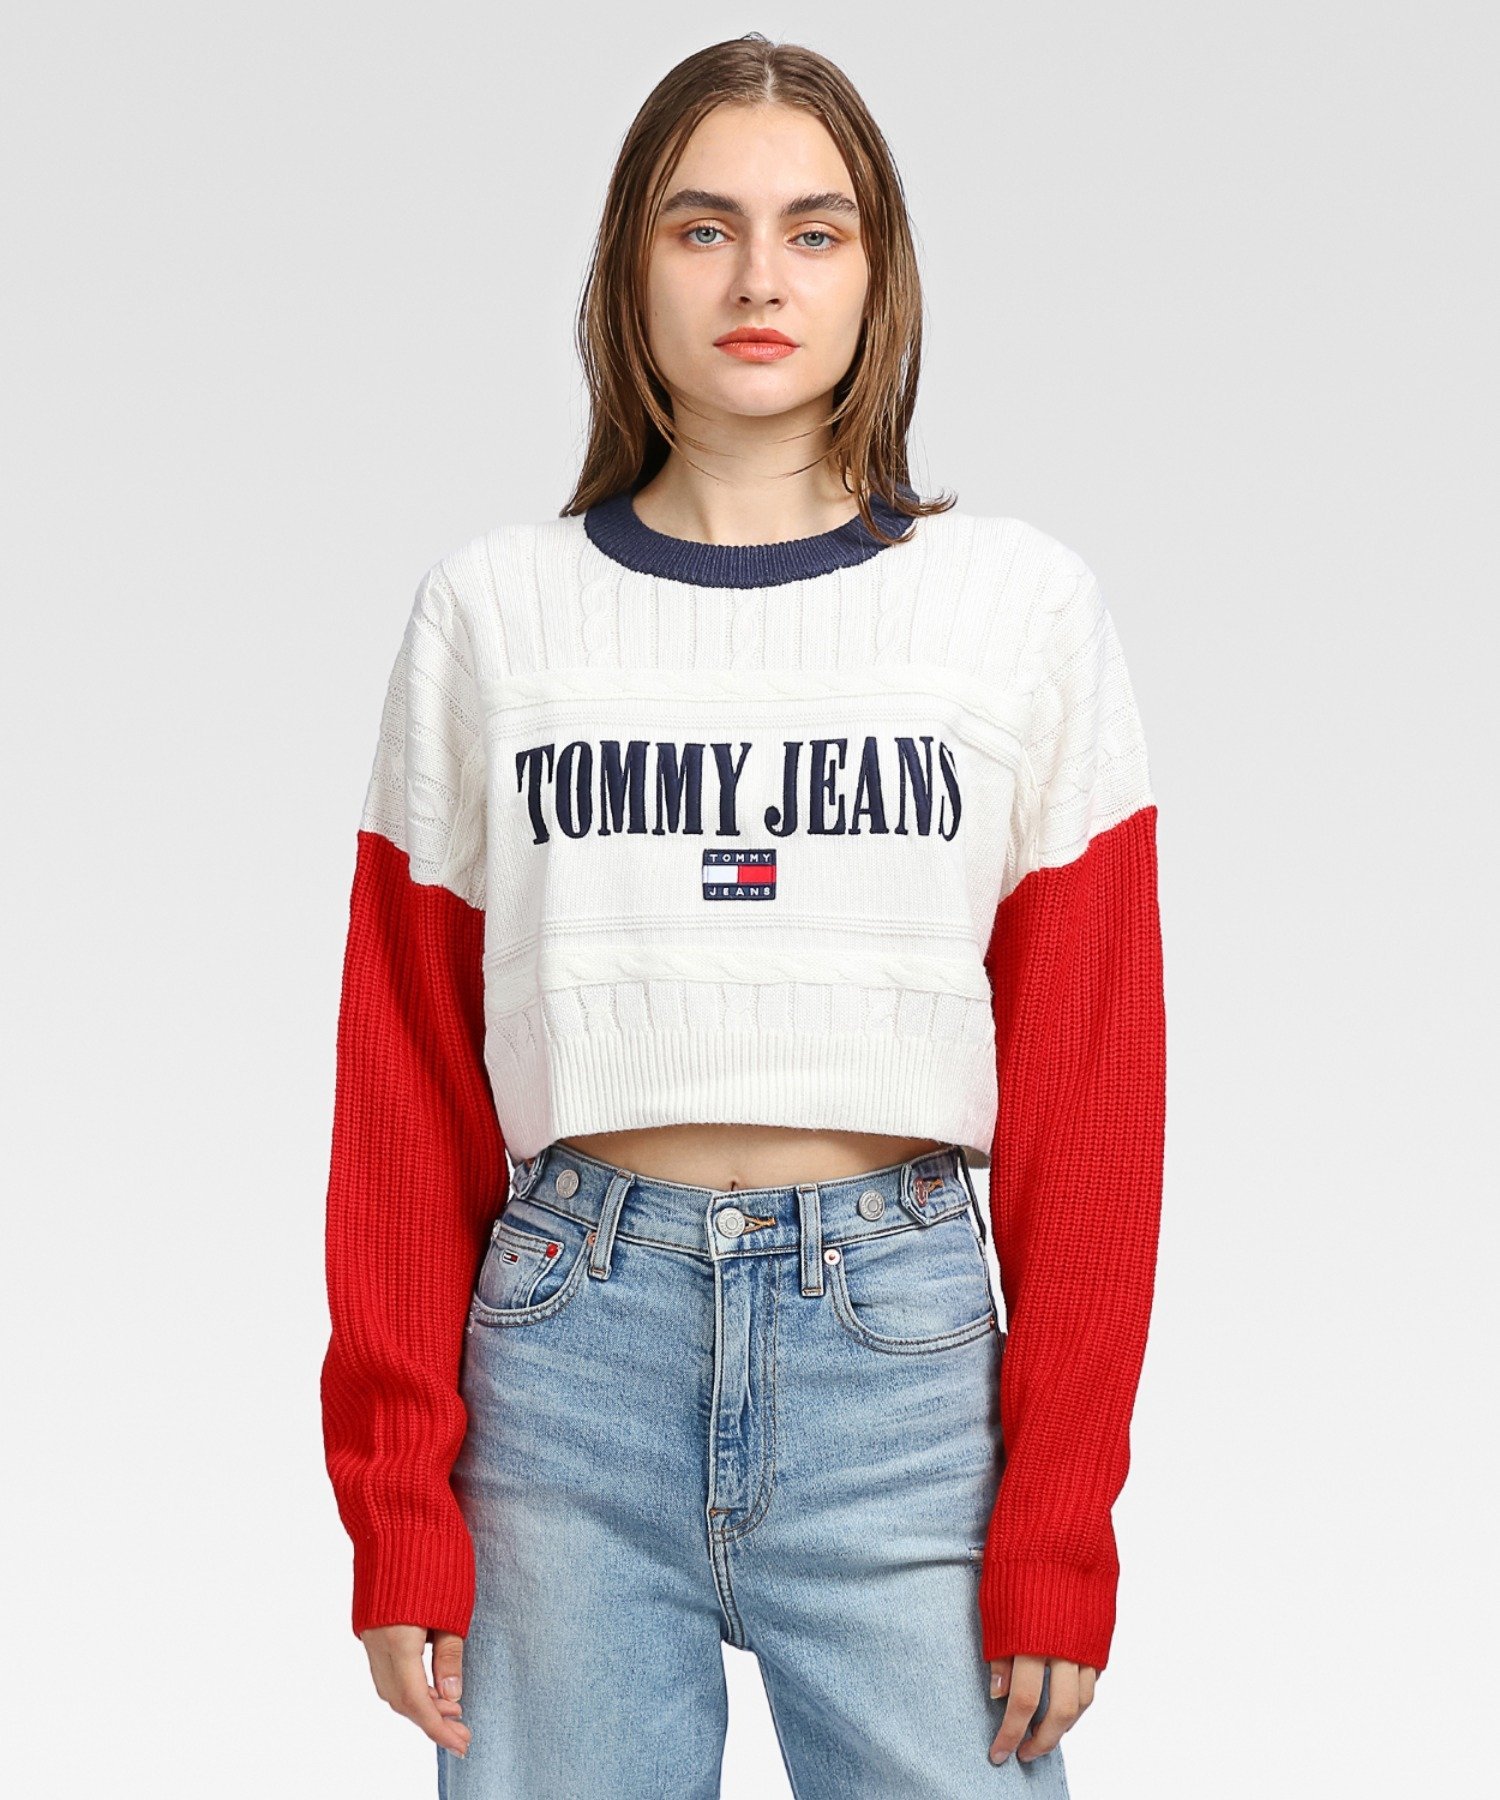 【SALE／50%OFF】TOMMY JEANS (W)TOMMY HILFIGER(トミーヒルフィガー) クロップドアーカイブセーター トミーヒルフィガー トップス ニット ホワイト【送料無料】